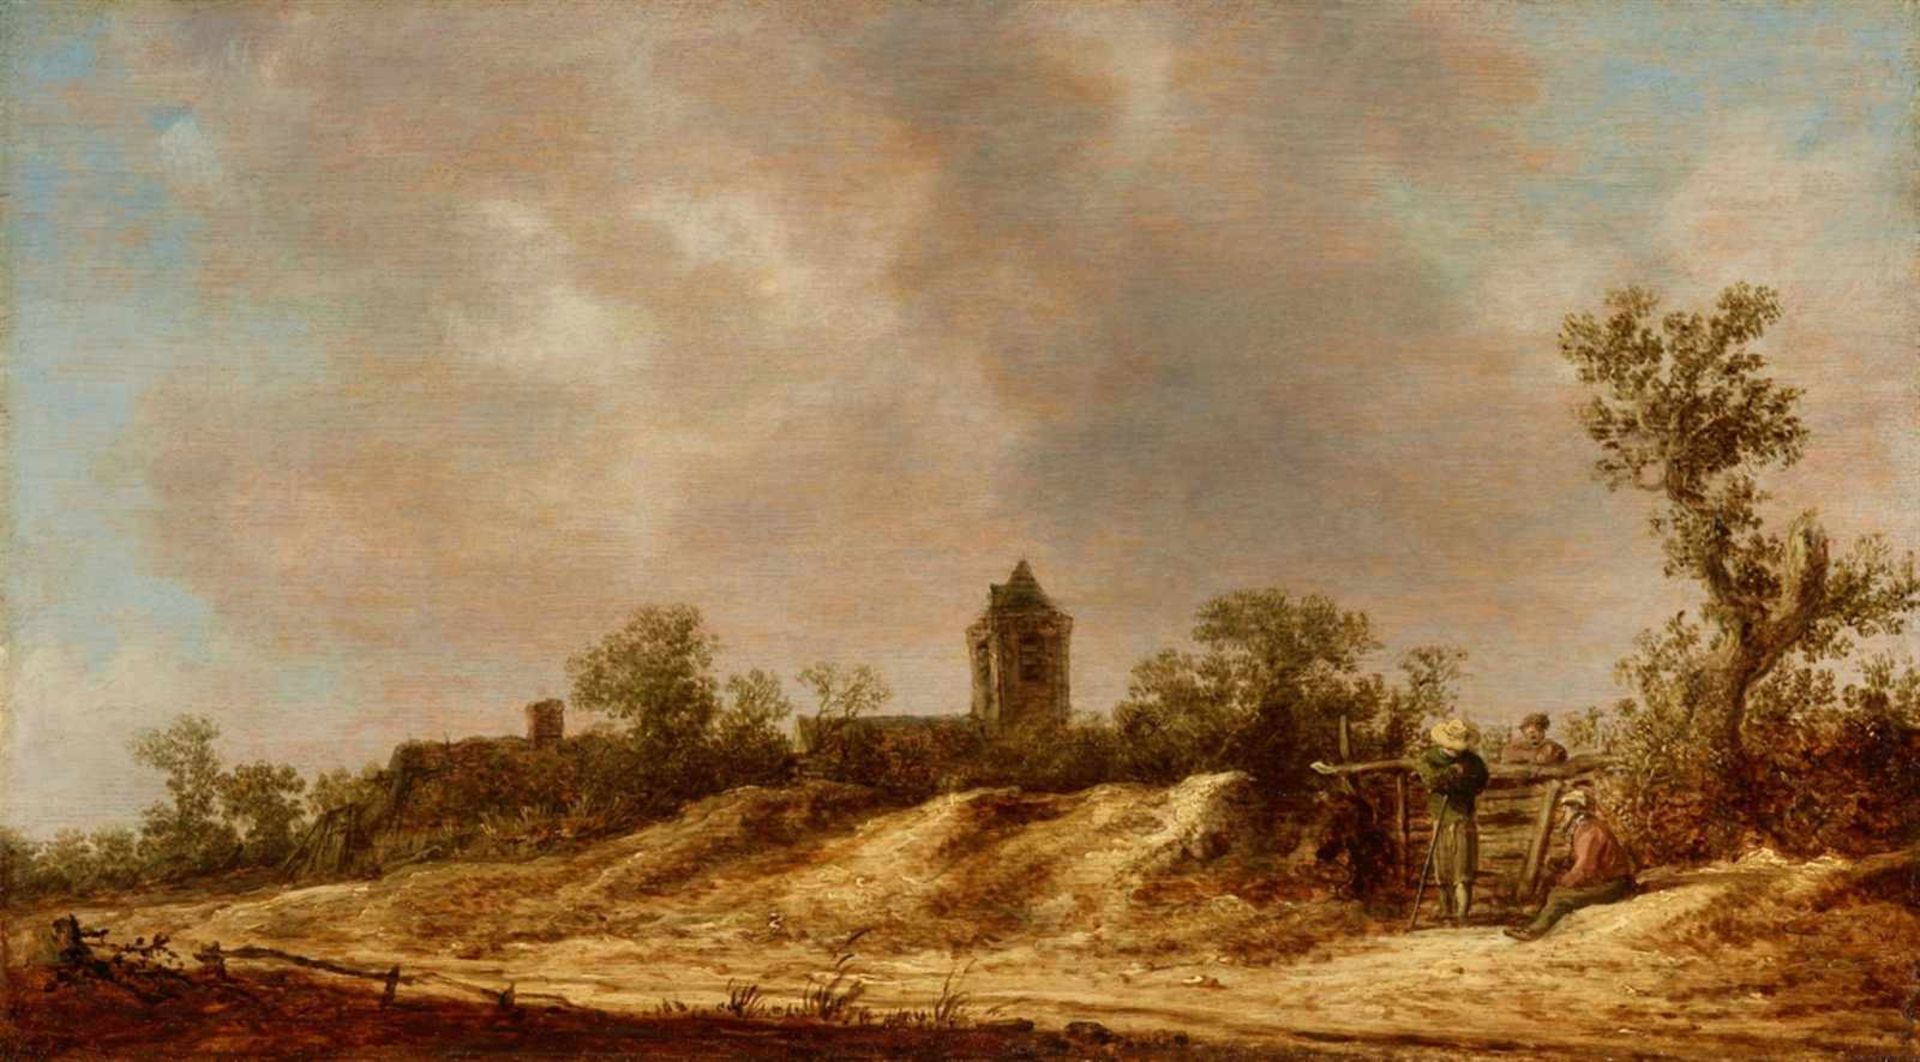 Jan van GoyenDune Landscape with a Church Spire and Figures on a FenceOil on panel. 32 x 56 cm.